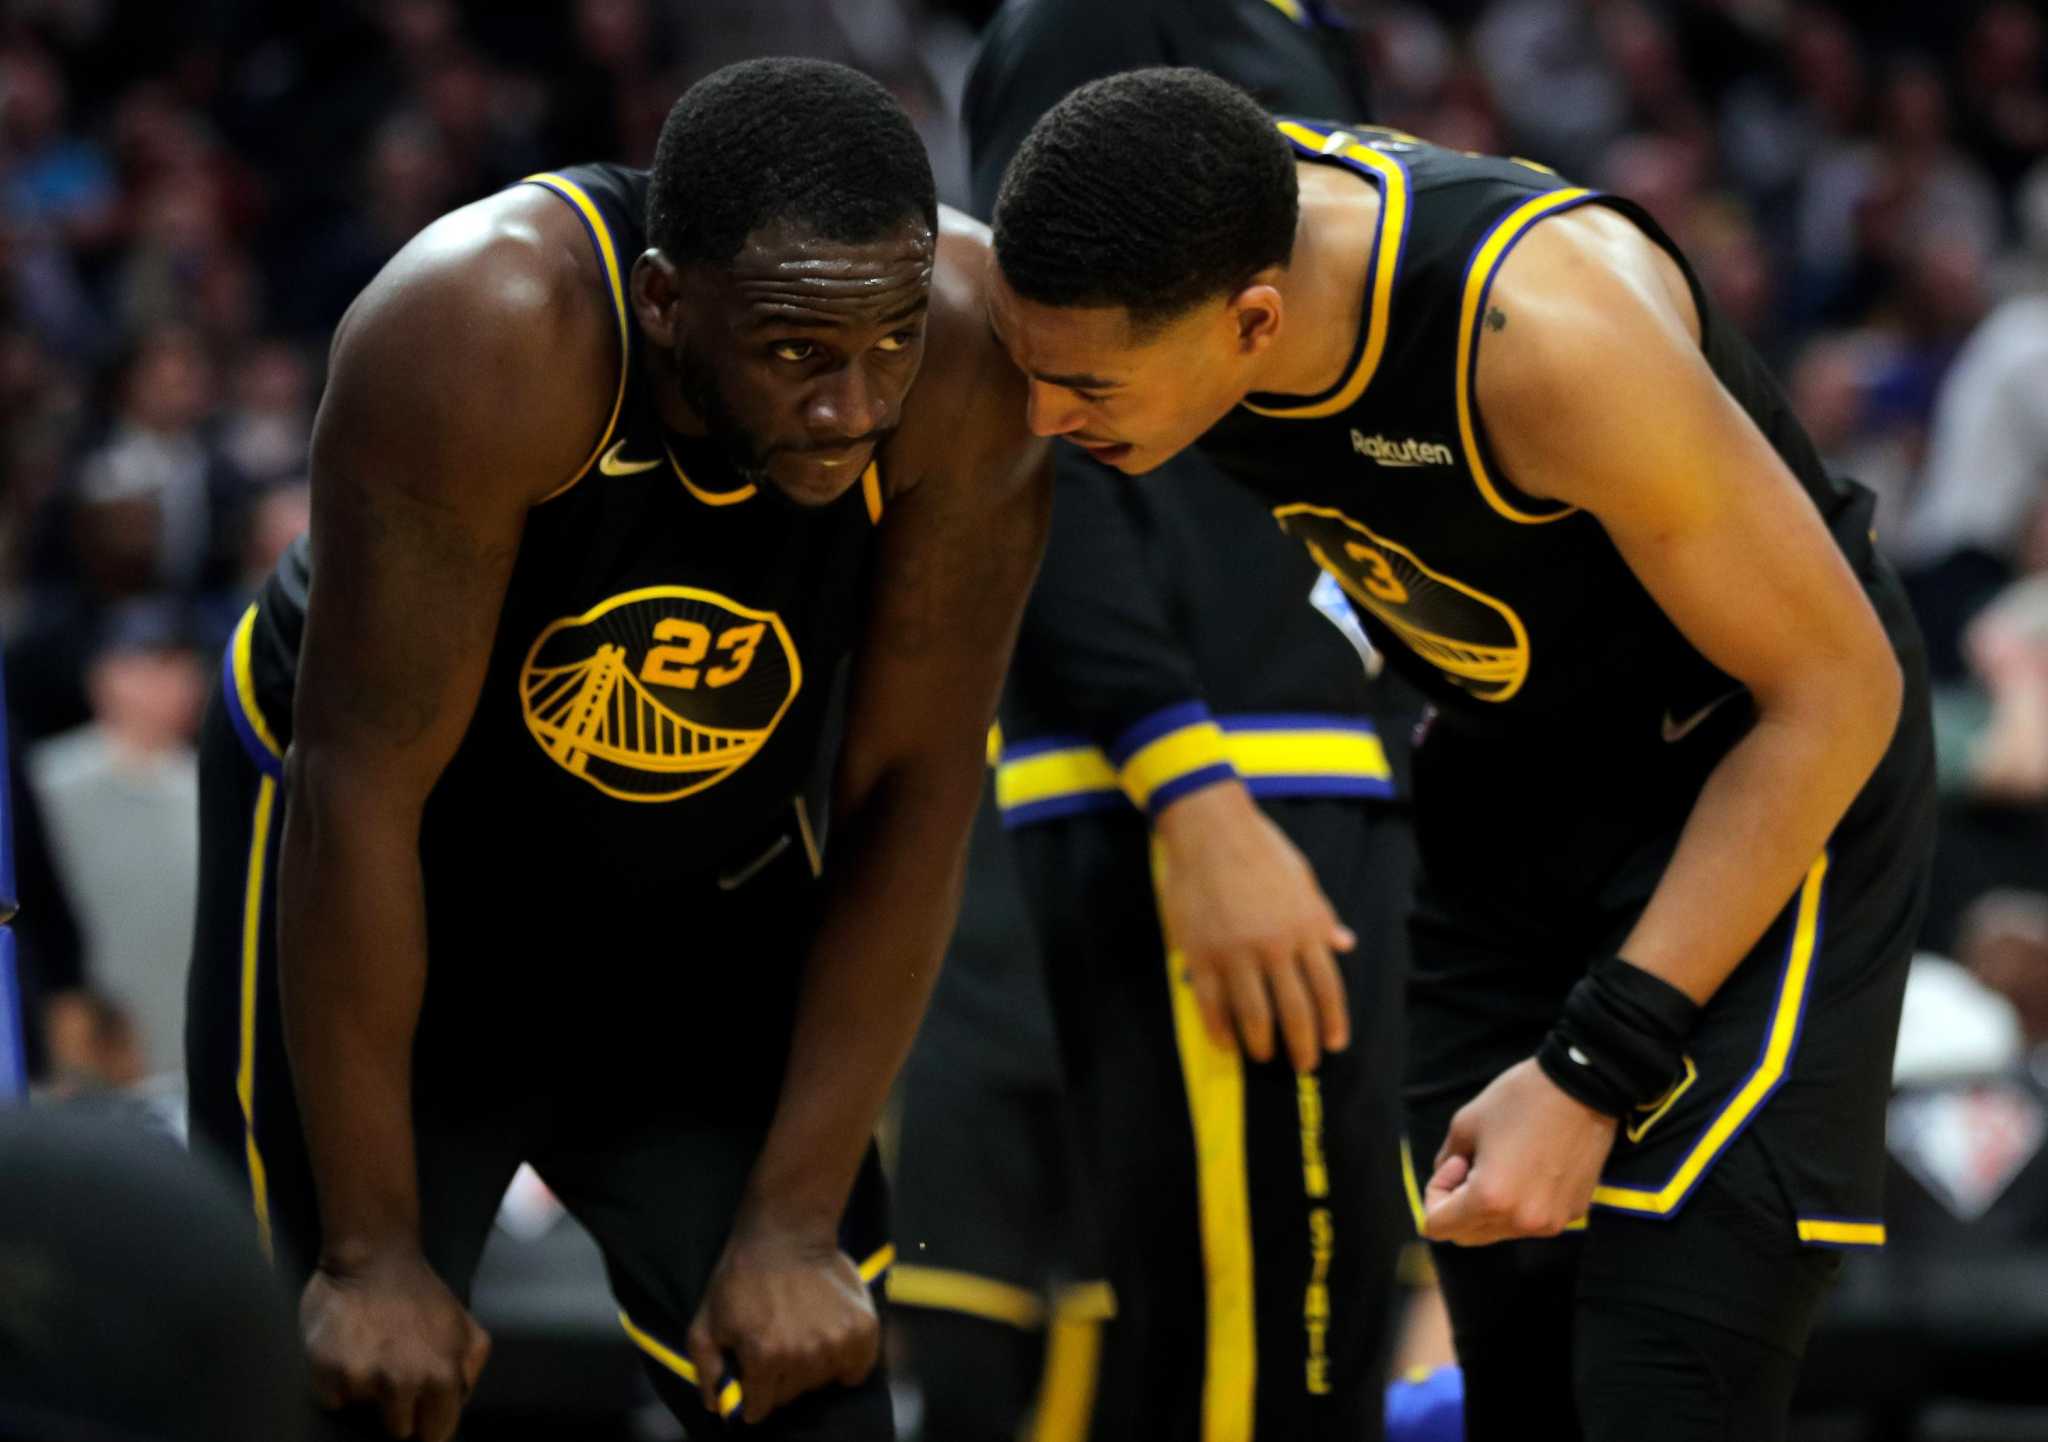 Jordan Poole (3) checks on Draymond Green (23) after he was fouled and fell to court in the second half as the Golden State Warriors played the Phoenix Suns at Chase Center in San Francisco, Calif., on Wednesday, March 30, 2022.